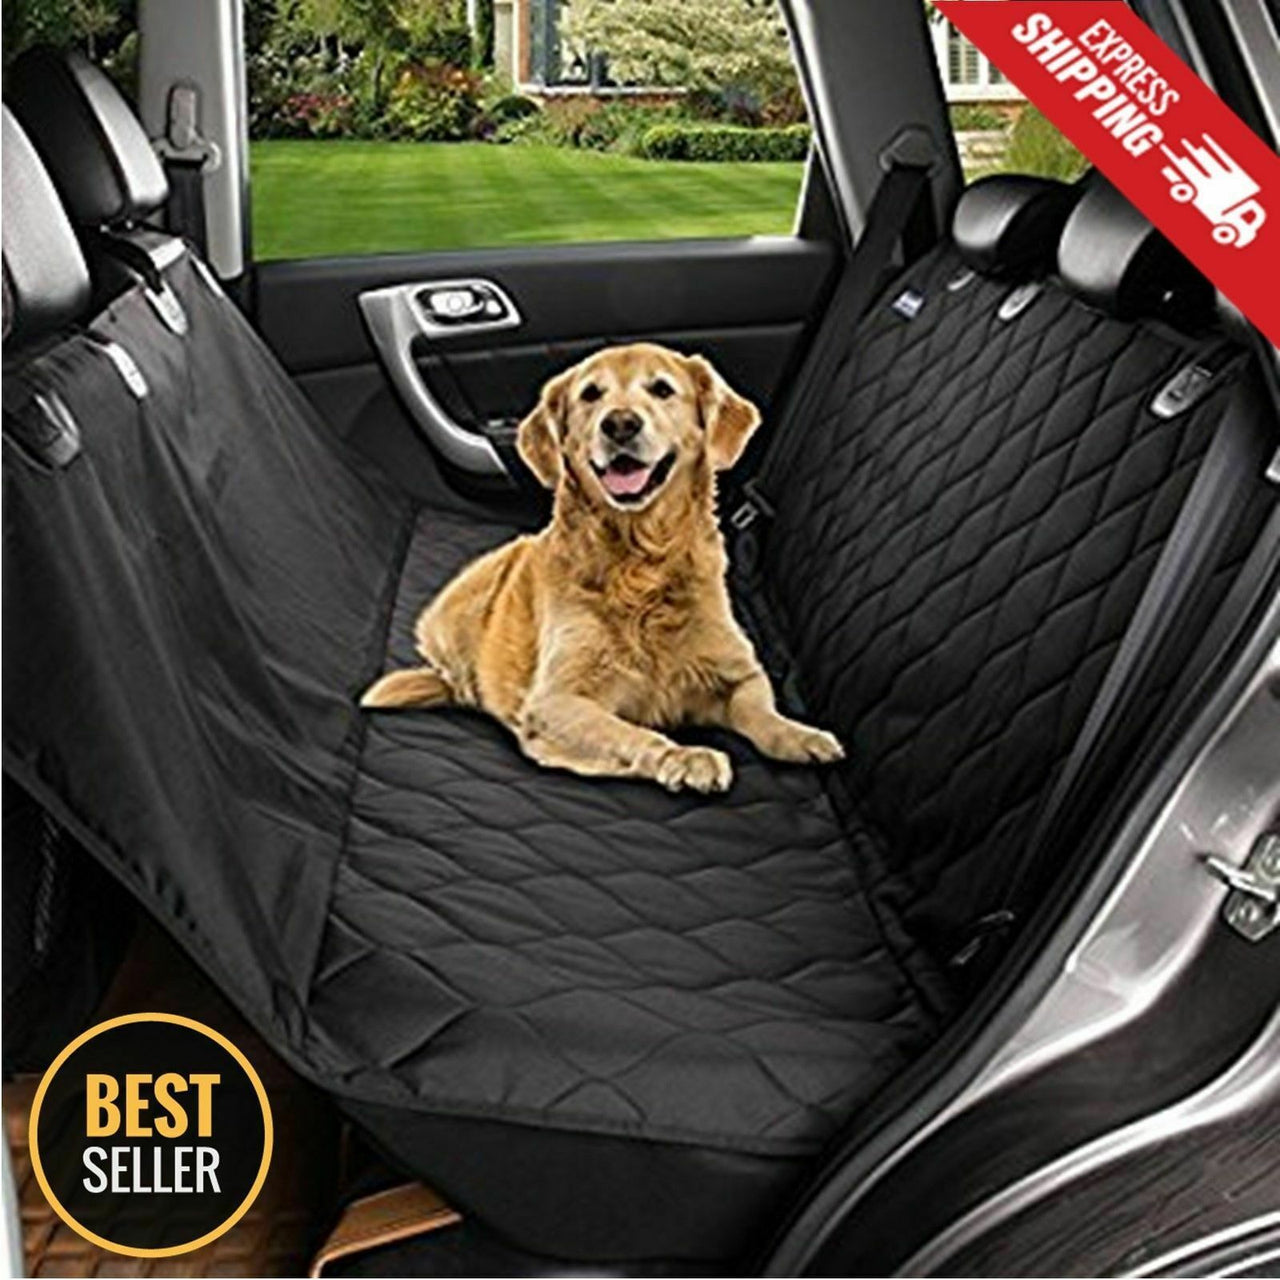 Seat Cover Rear Back Car Pet Dog Travel Waterproof Bench Protector Luxury -Black - InspiredGrabs.com